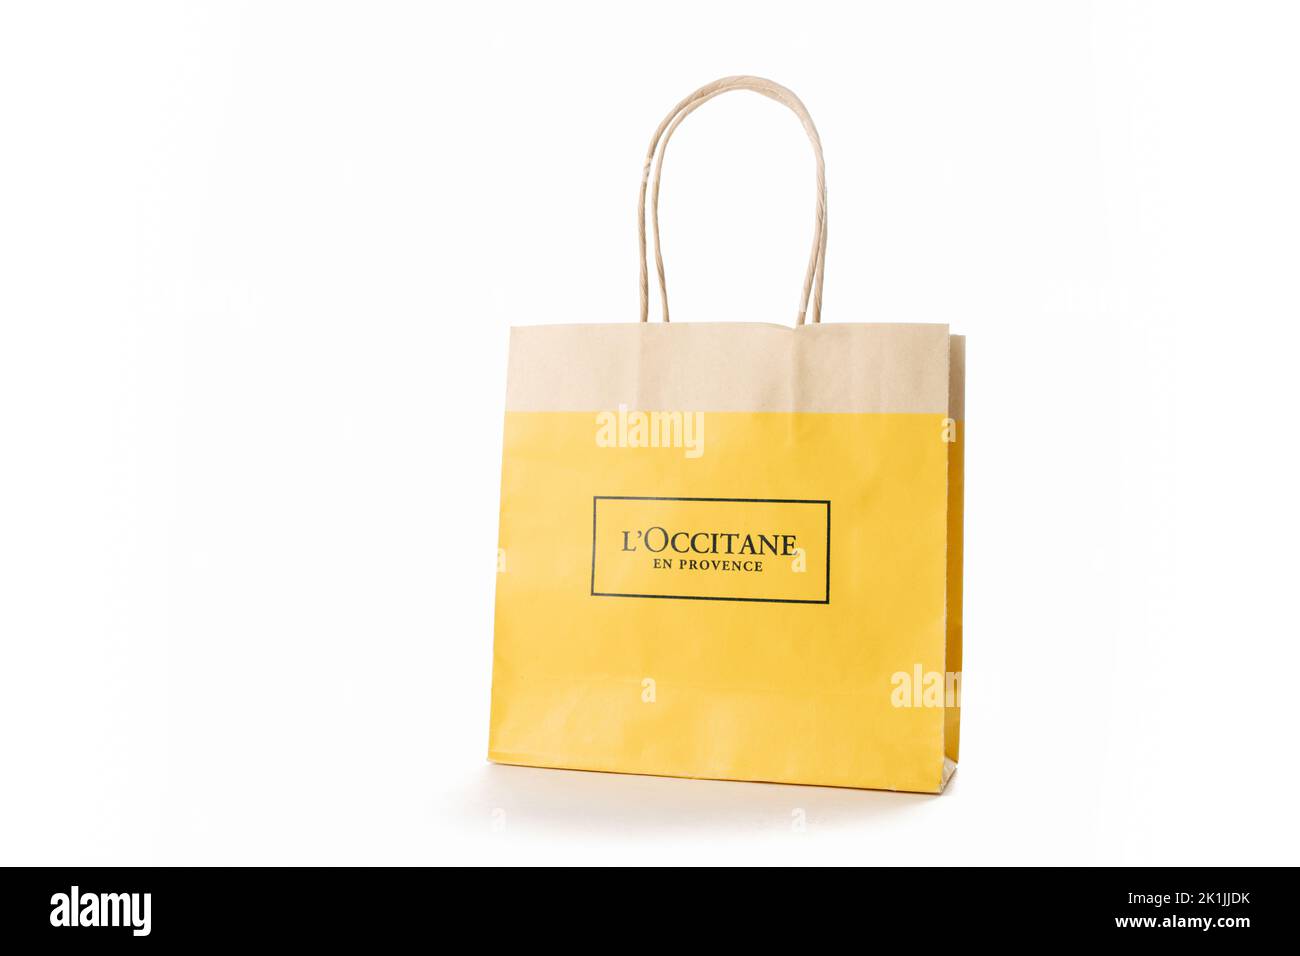 Cyprus, Paphos - SEPTEMBER 08, 2022: Yellow branded paper bag of L'Occitane en Provence beauty products shop. Over white background. Stock Photo